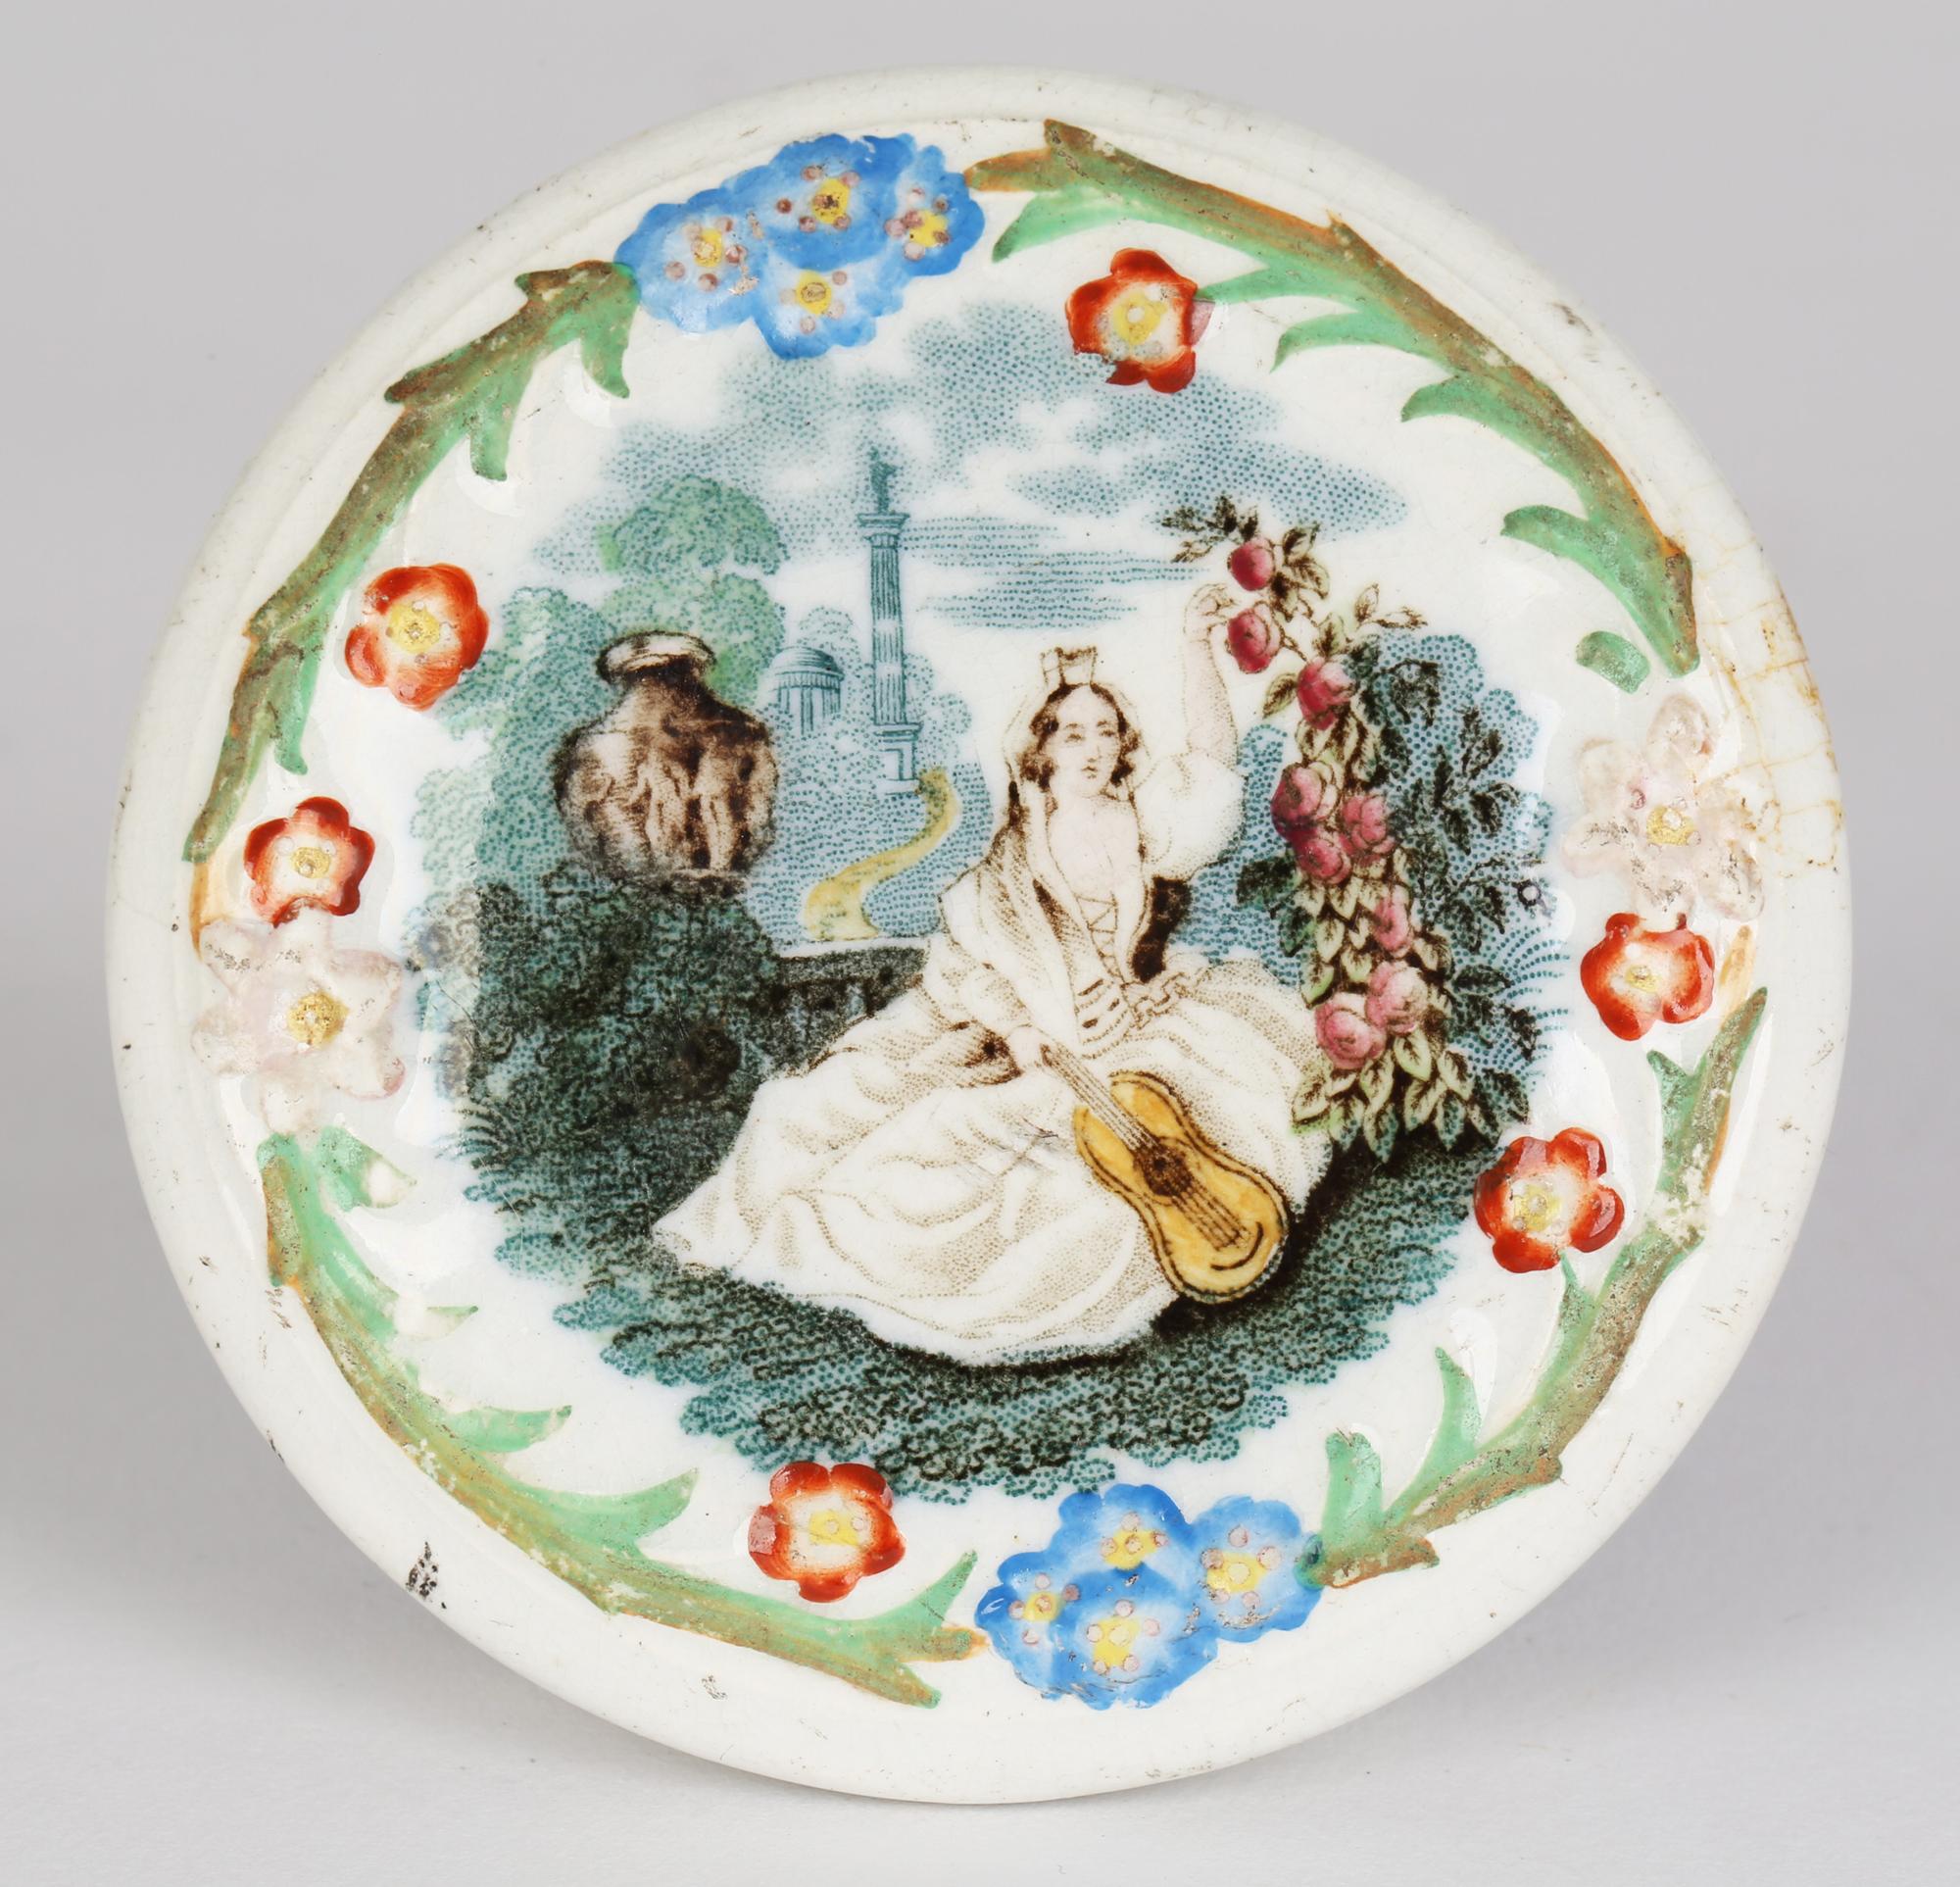 Jenny Lind Rare Printed and Hand Painted Pot Lid Attributed to Ridgway In Good Condition For Sale In Bishop's Stortford, Hertfordshire